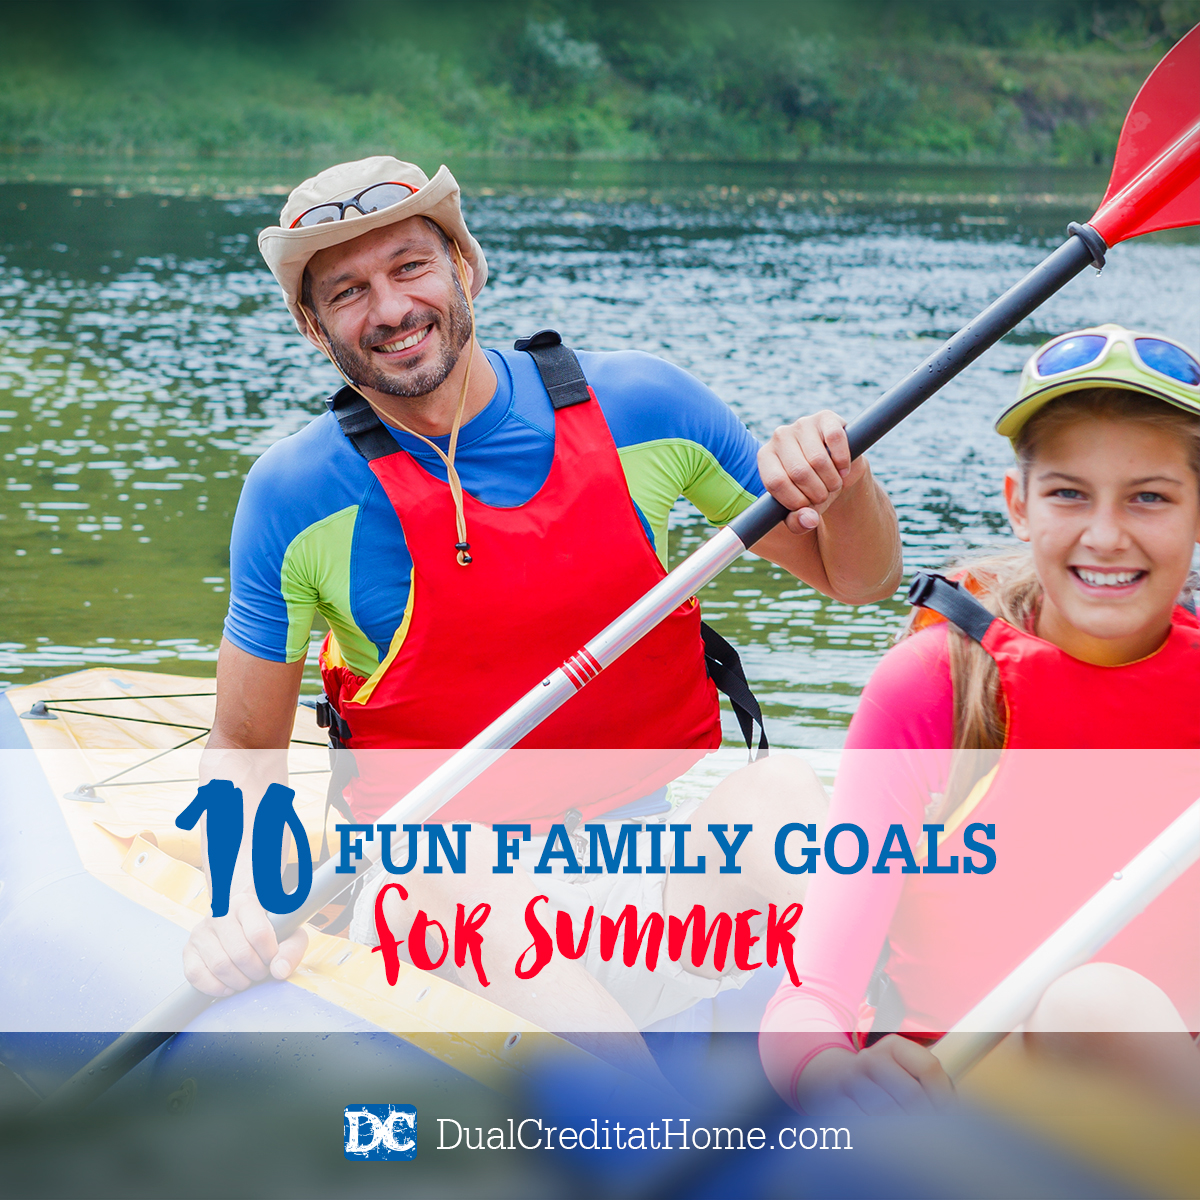 10 Ideas for Fun Family Goals this Summer